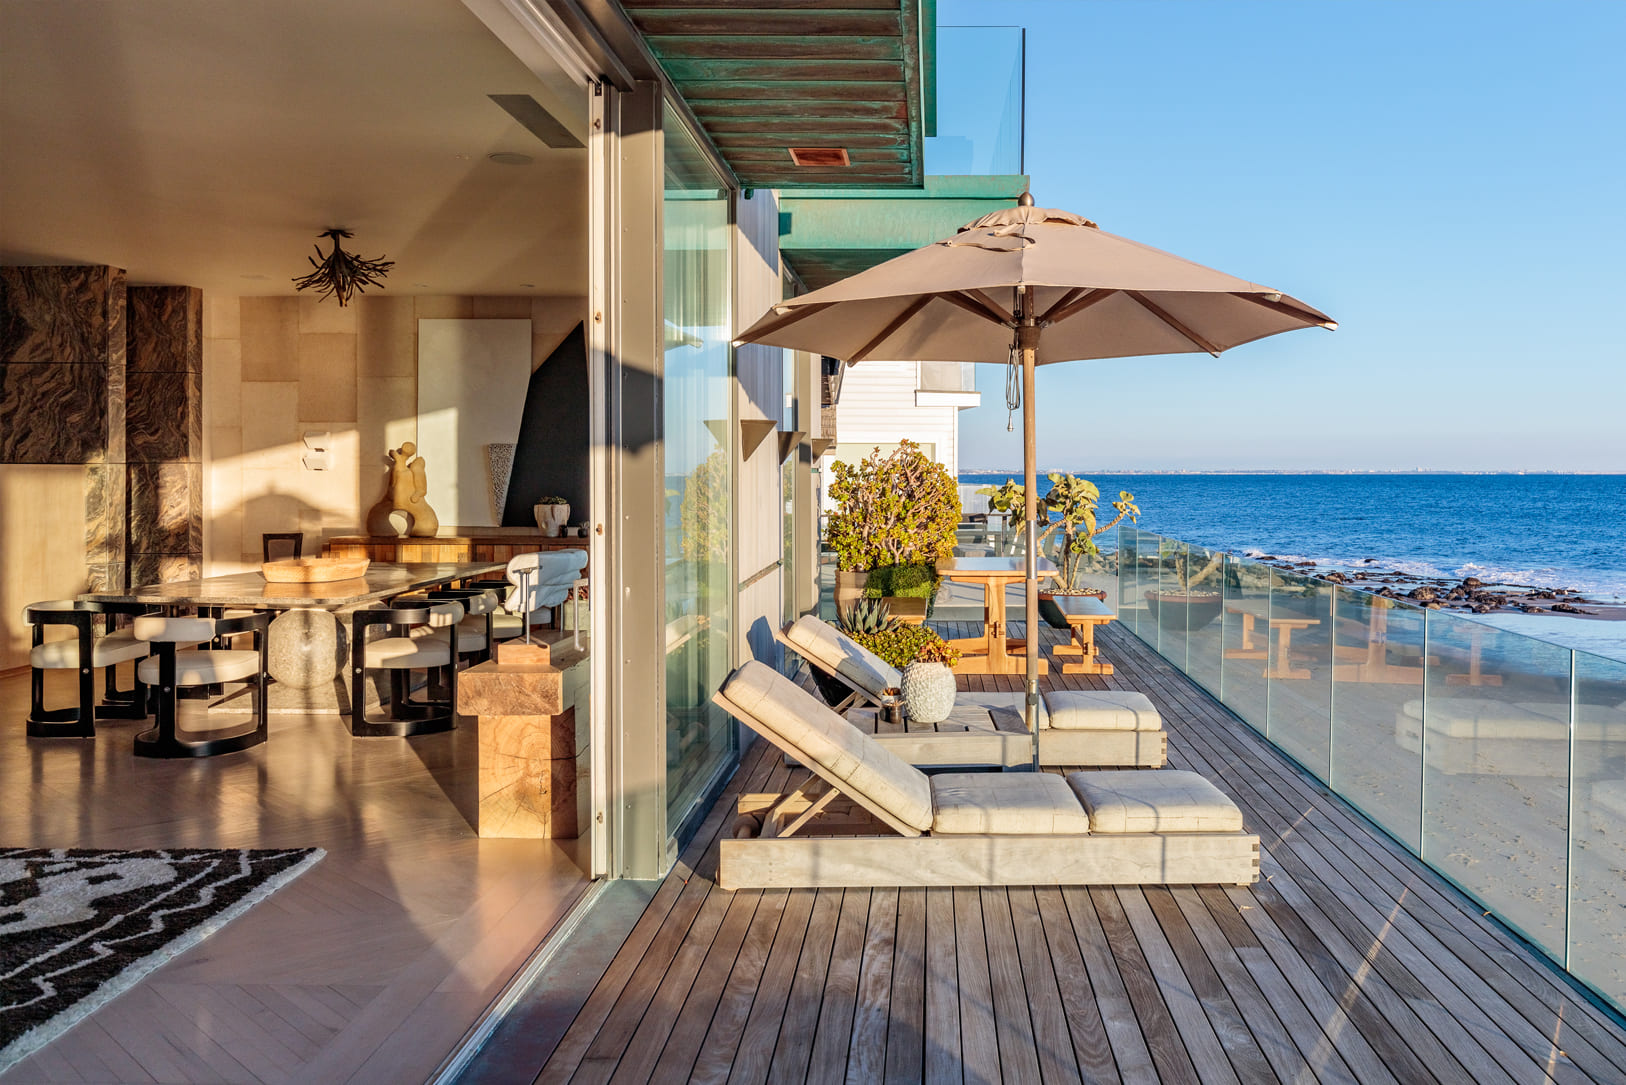 Malibu Beach House beach front terrace with lounge chairs and view of pacific ocean